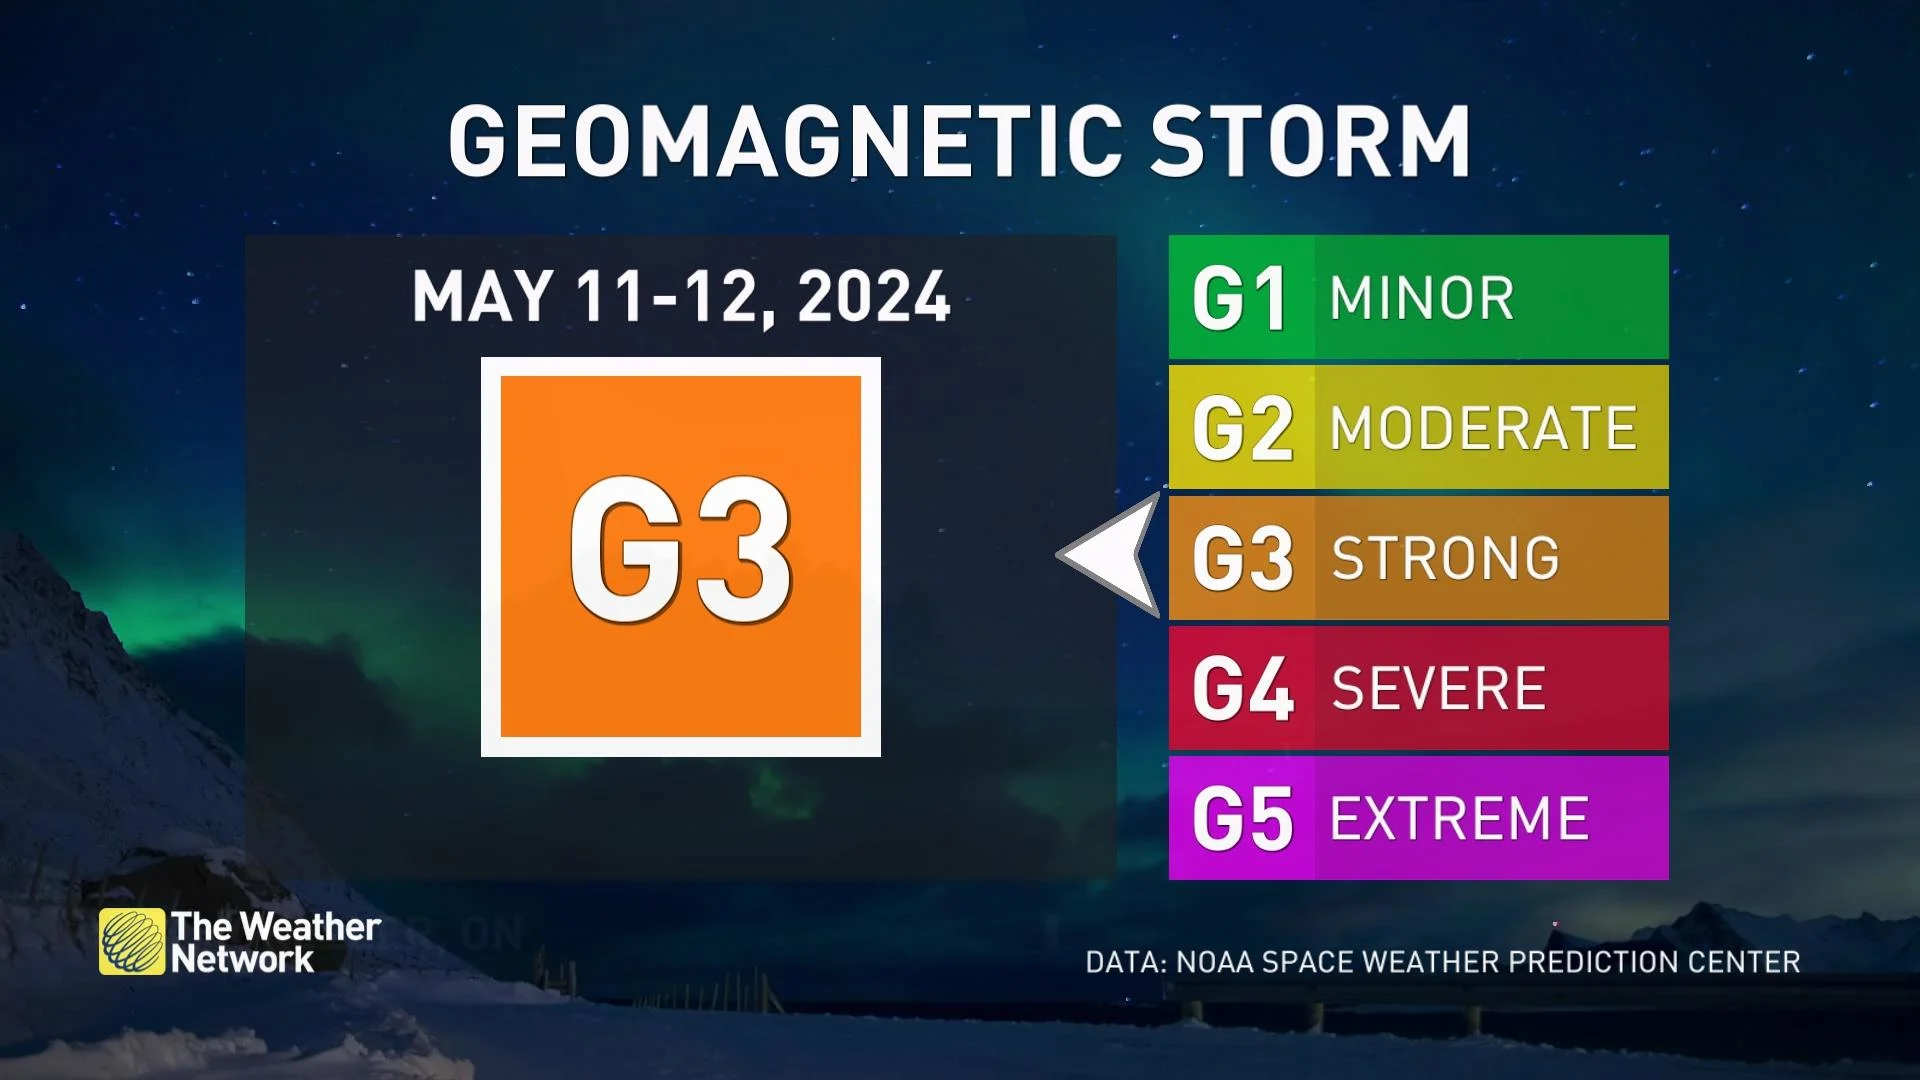 May 11-12 2024 Geomagnetic Storm Forecast